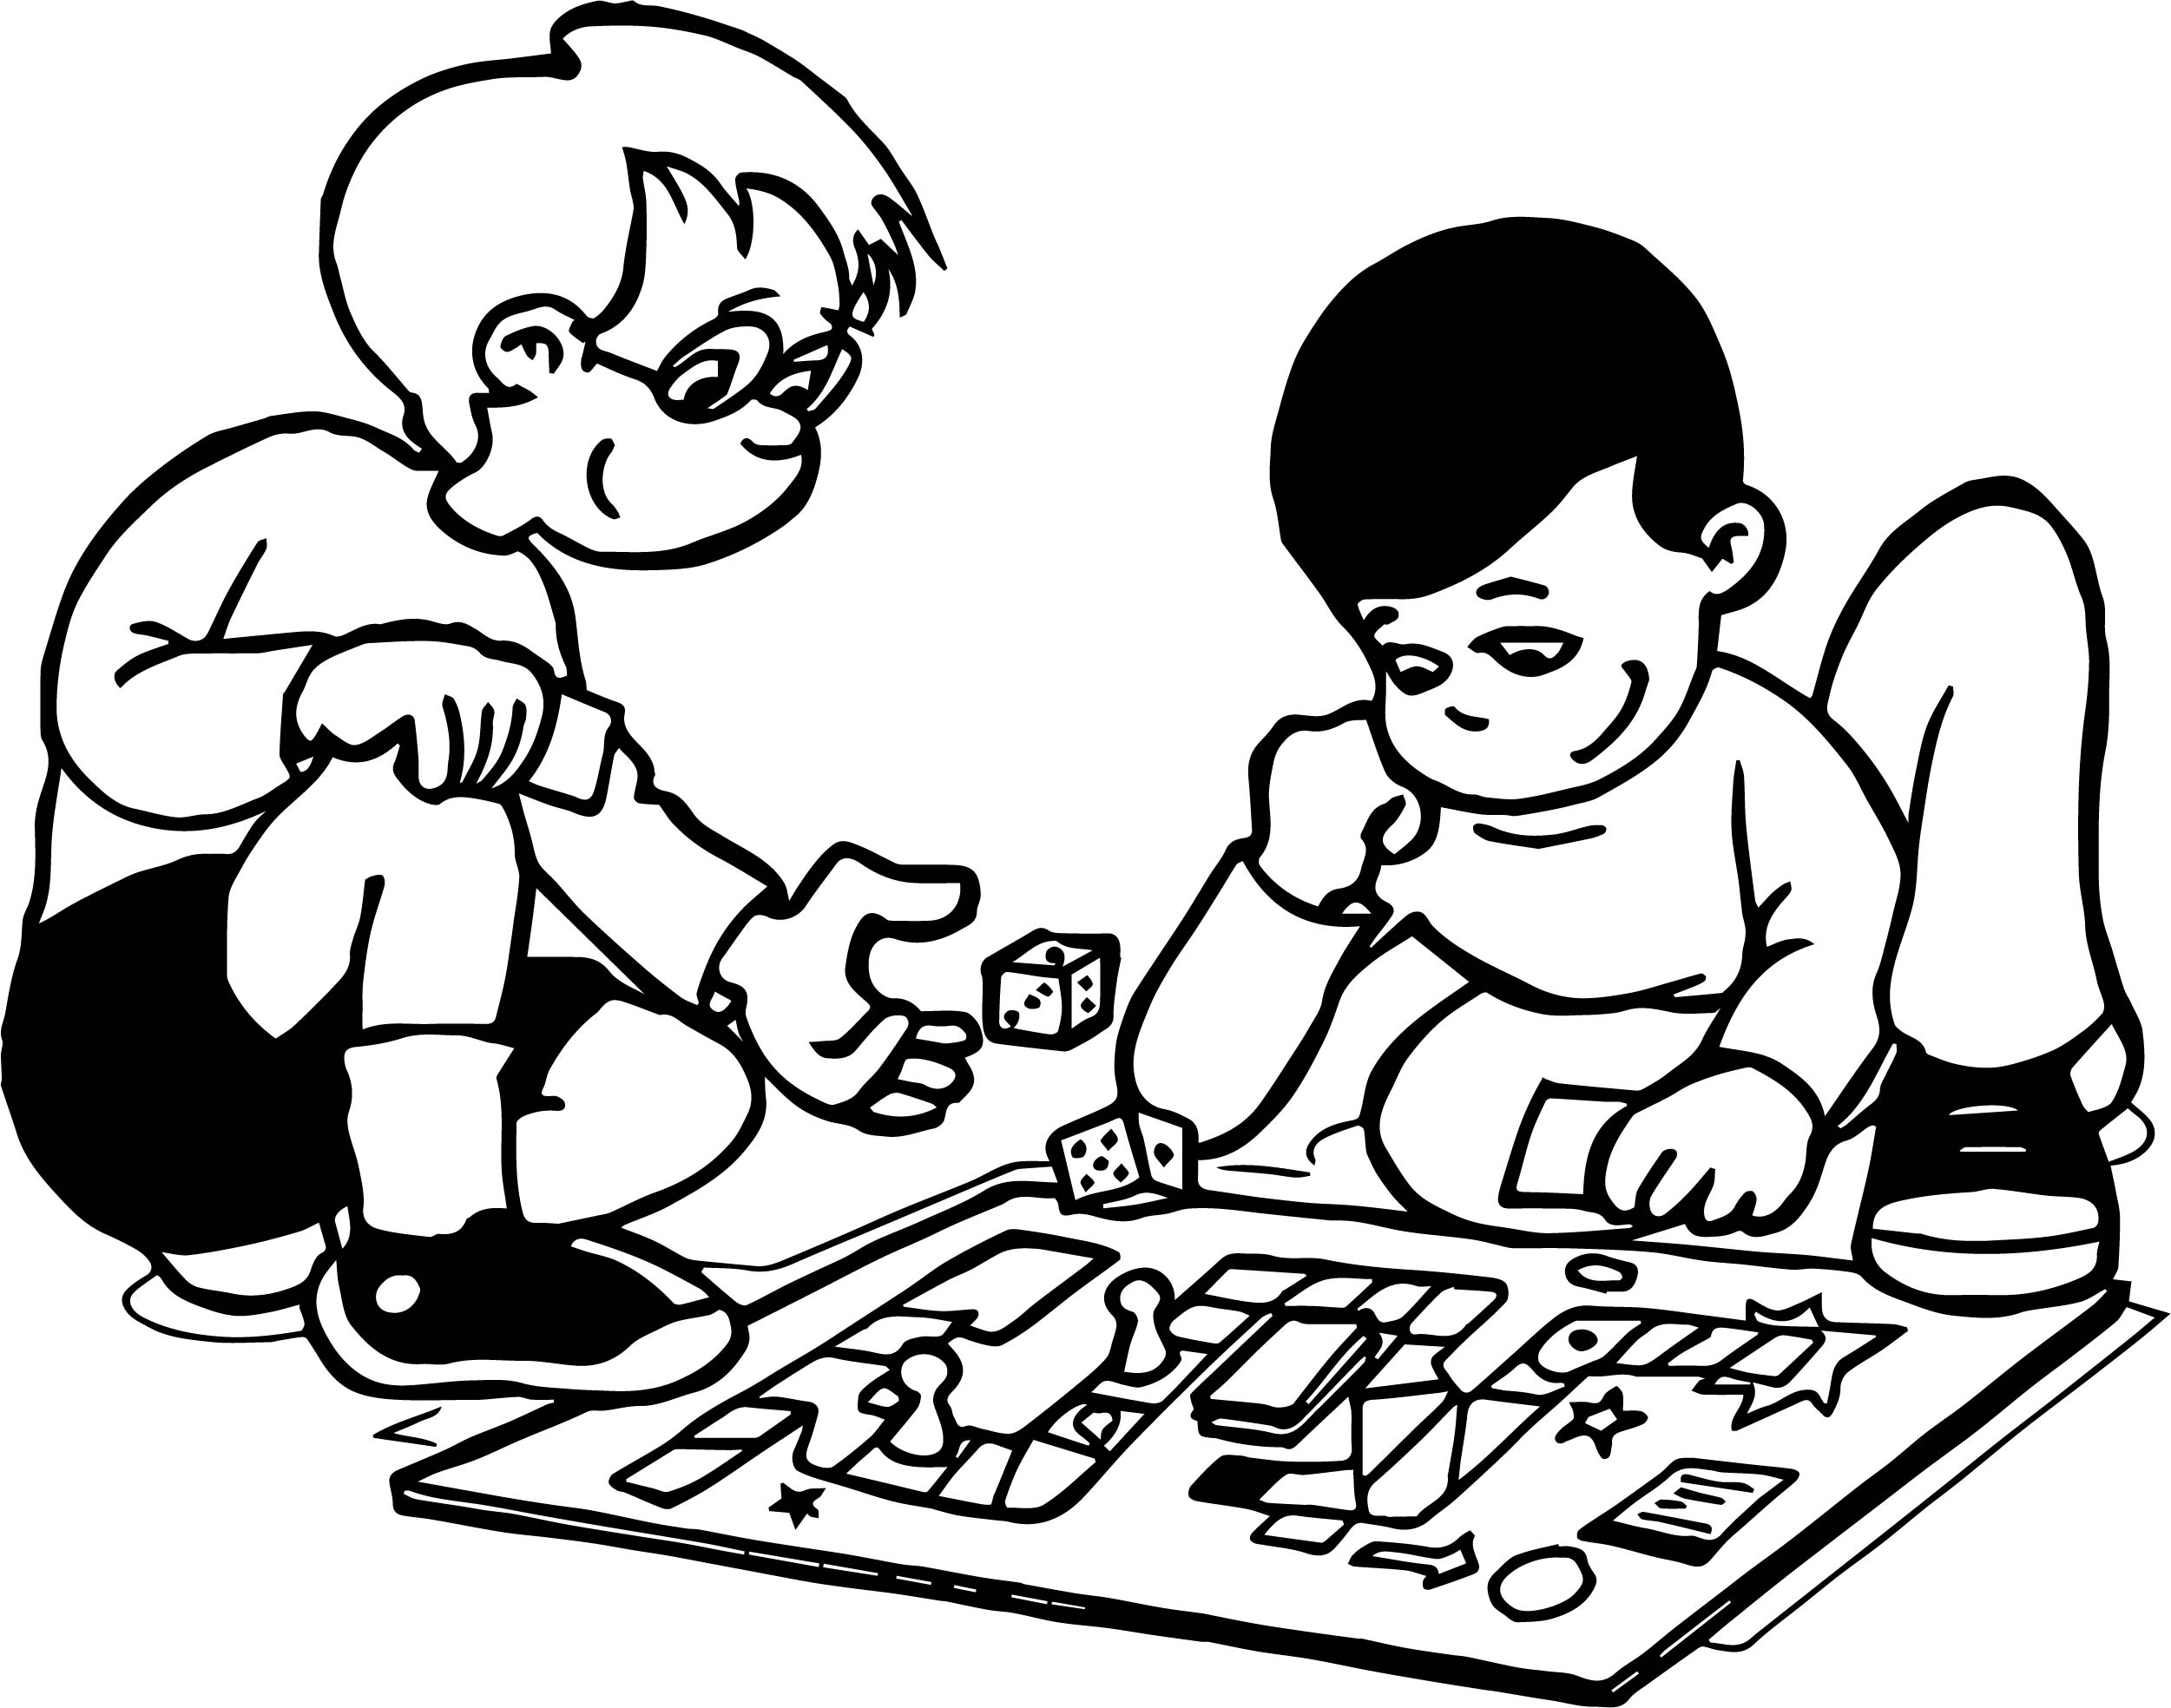 Board Game Coloring Pages at GetColorings.com | Free printable